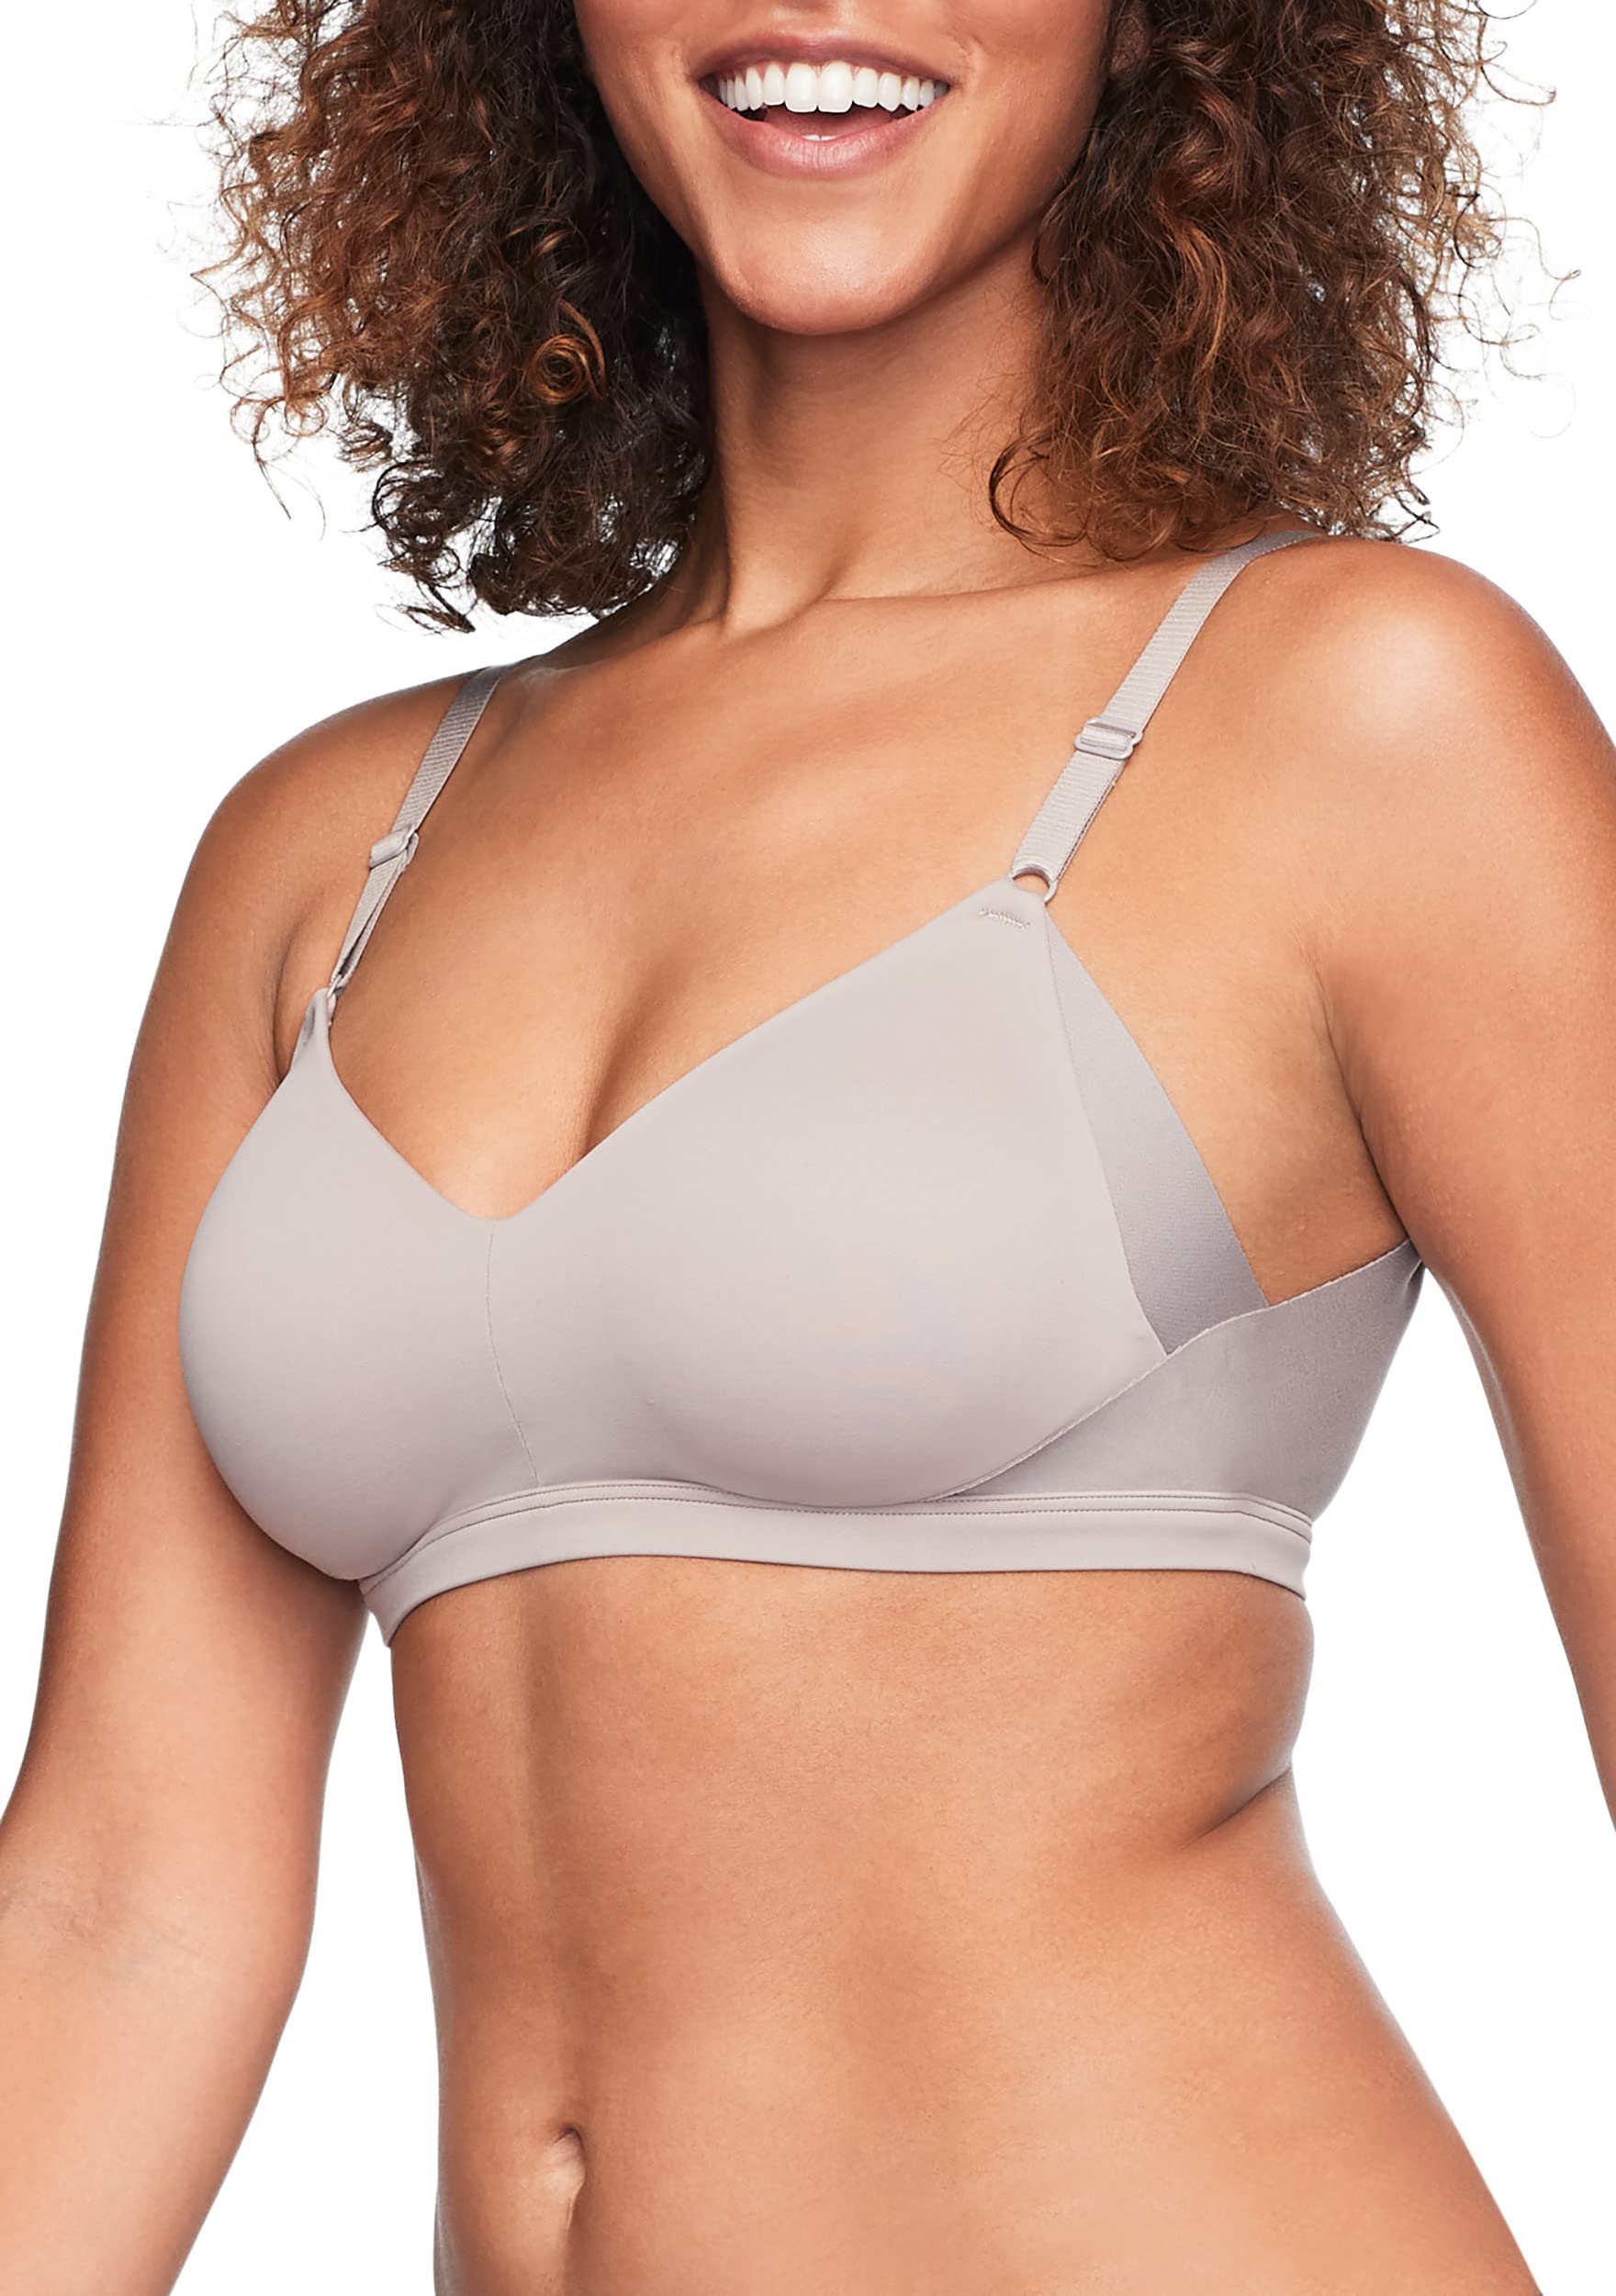 Warner's Women's No Side Effects Underarm and Back-Smoothing Comfort Wireless Lift T-Shirt Bra Rn2231a